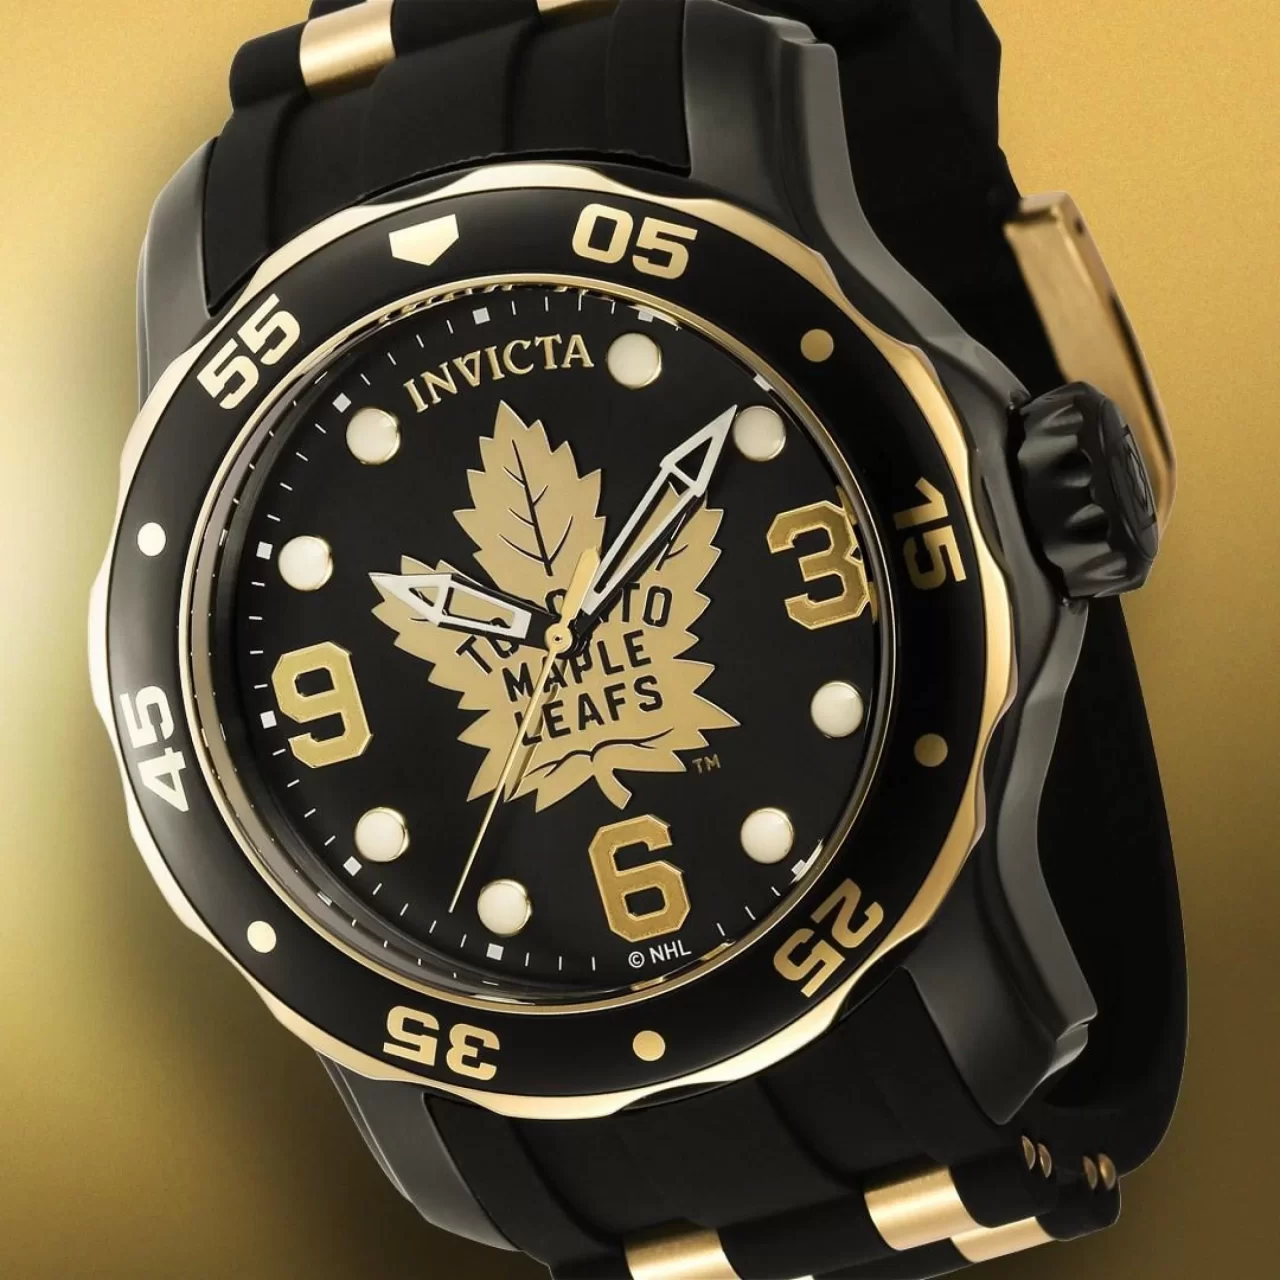 Invicta Shoots & Scores - Invicta Watch Group Launches National Hockey League Collection img#3